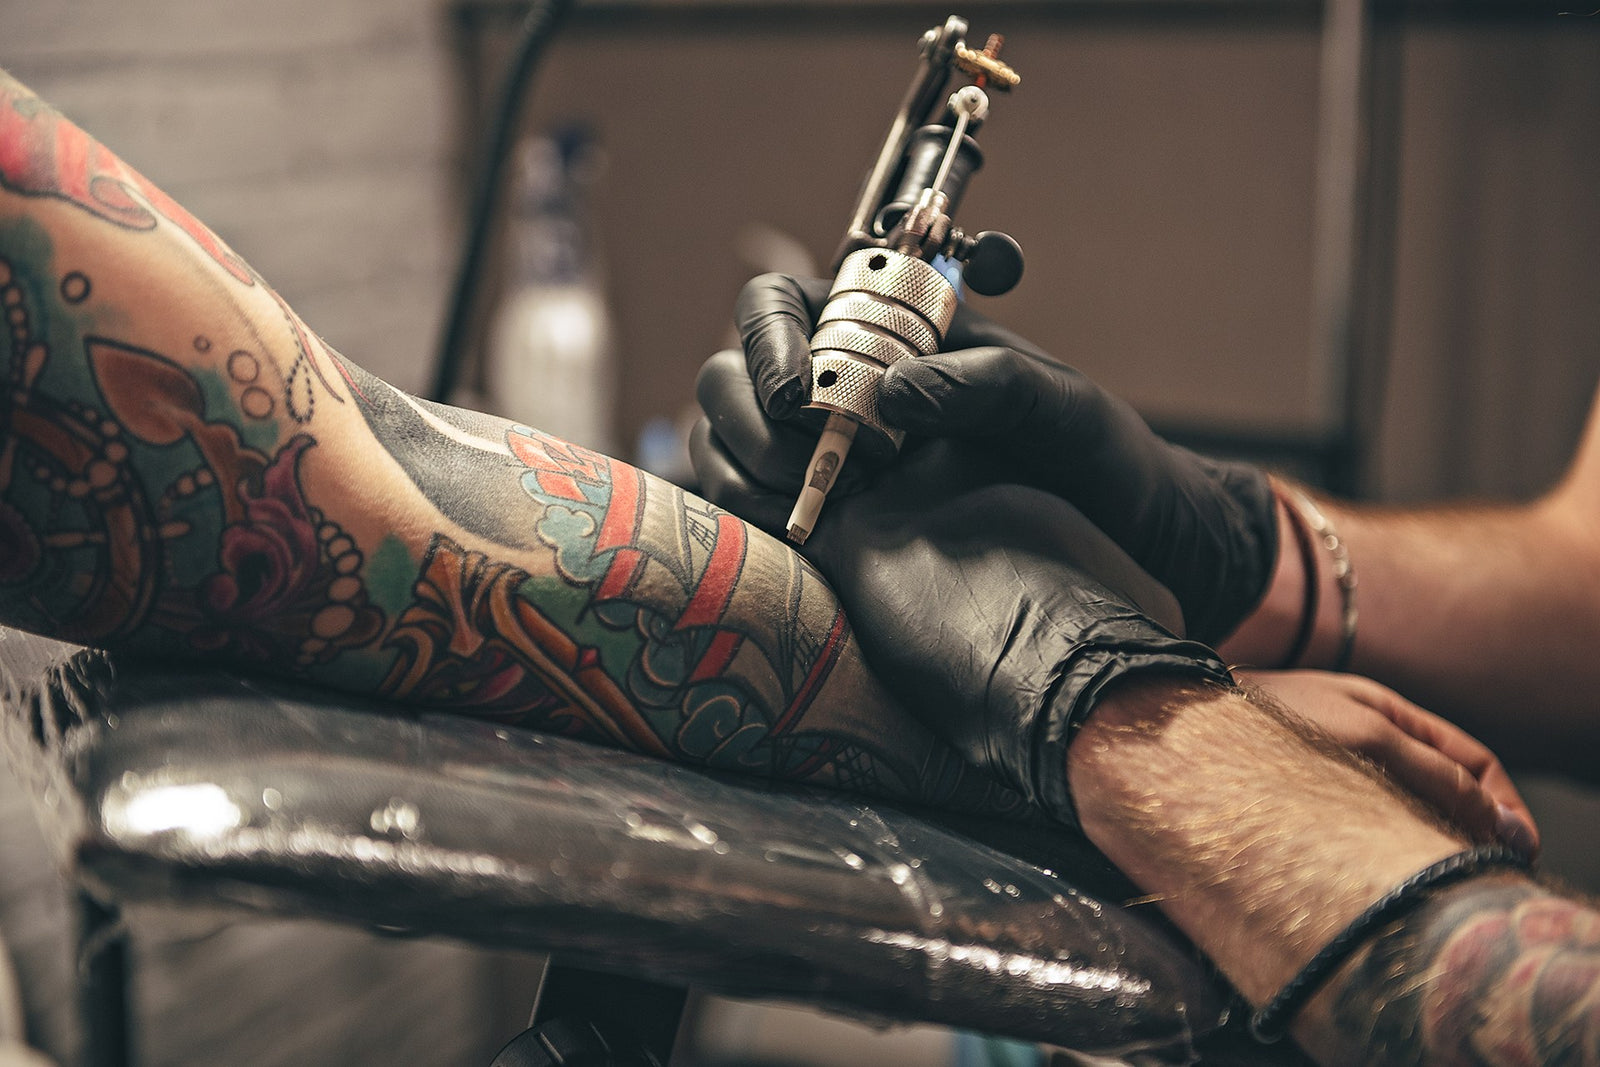 Tattoo Aftercare: How To Take Care of Your New Tattoo – PainlessTattoo